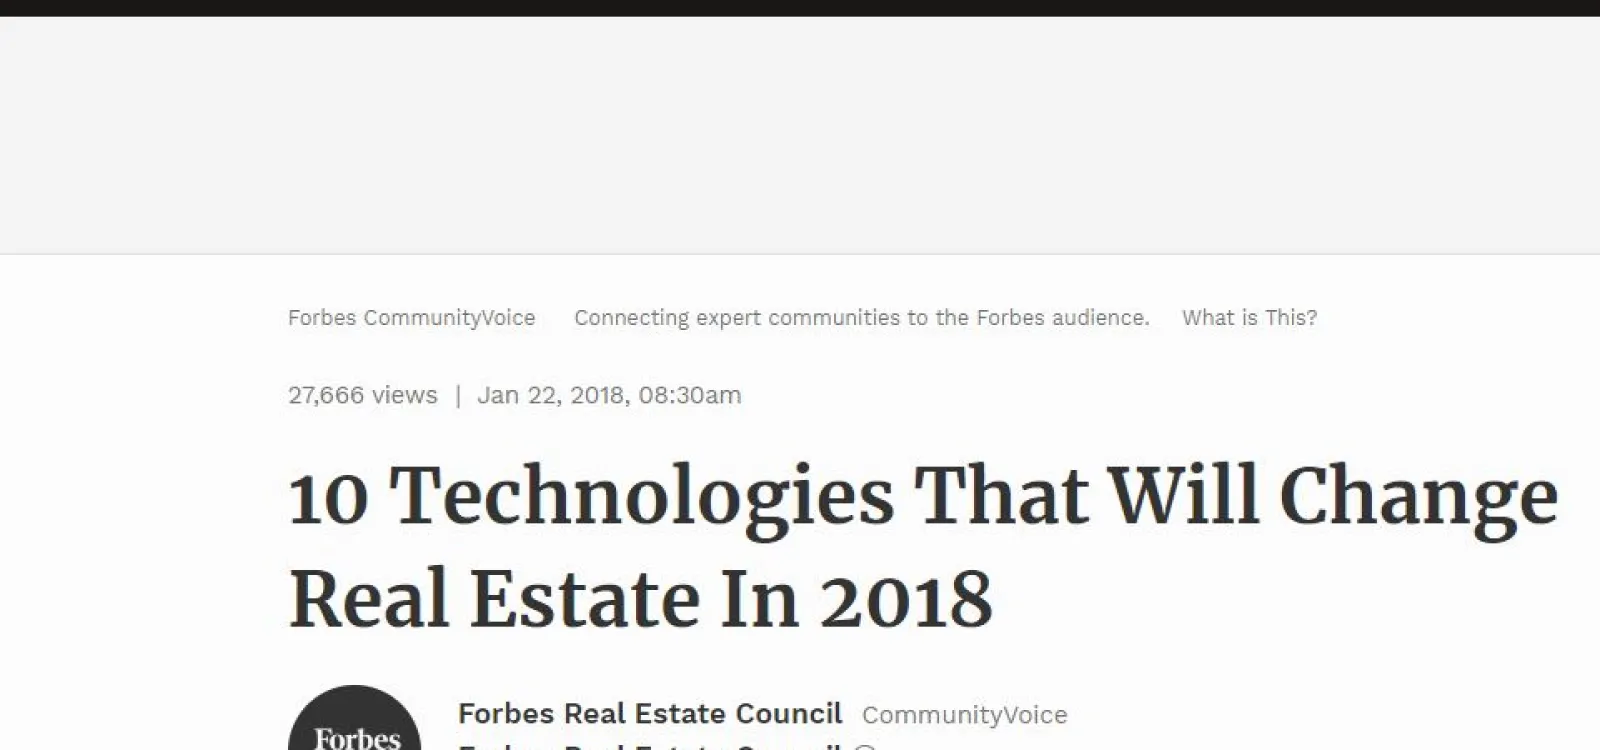 10 Technologies That Will Change Real Estate In 2018